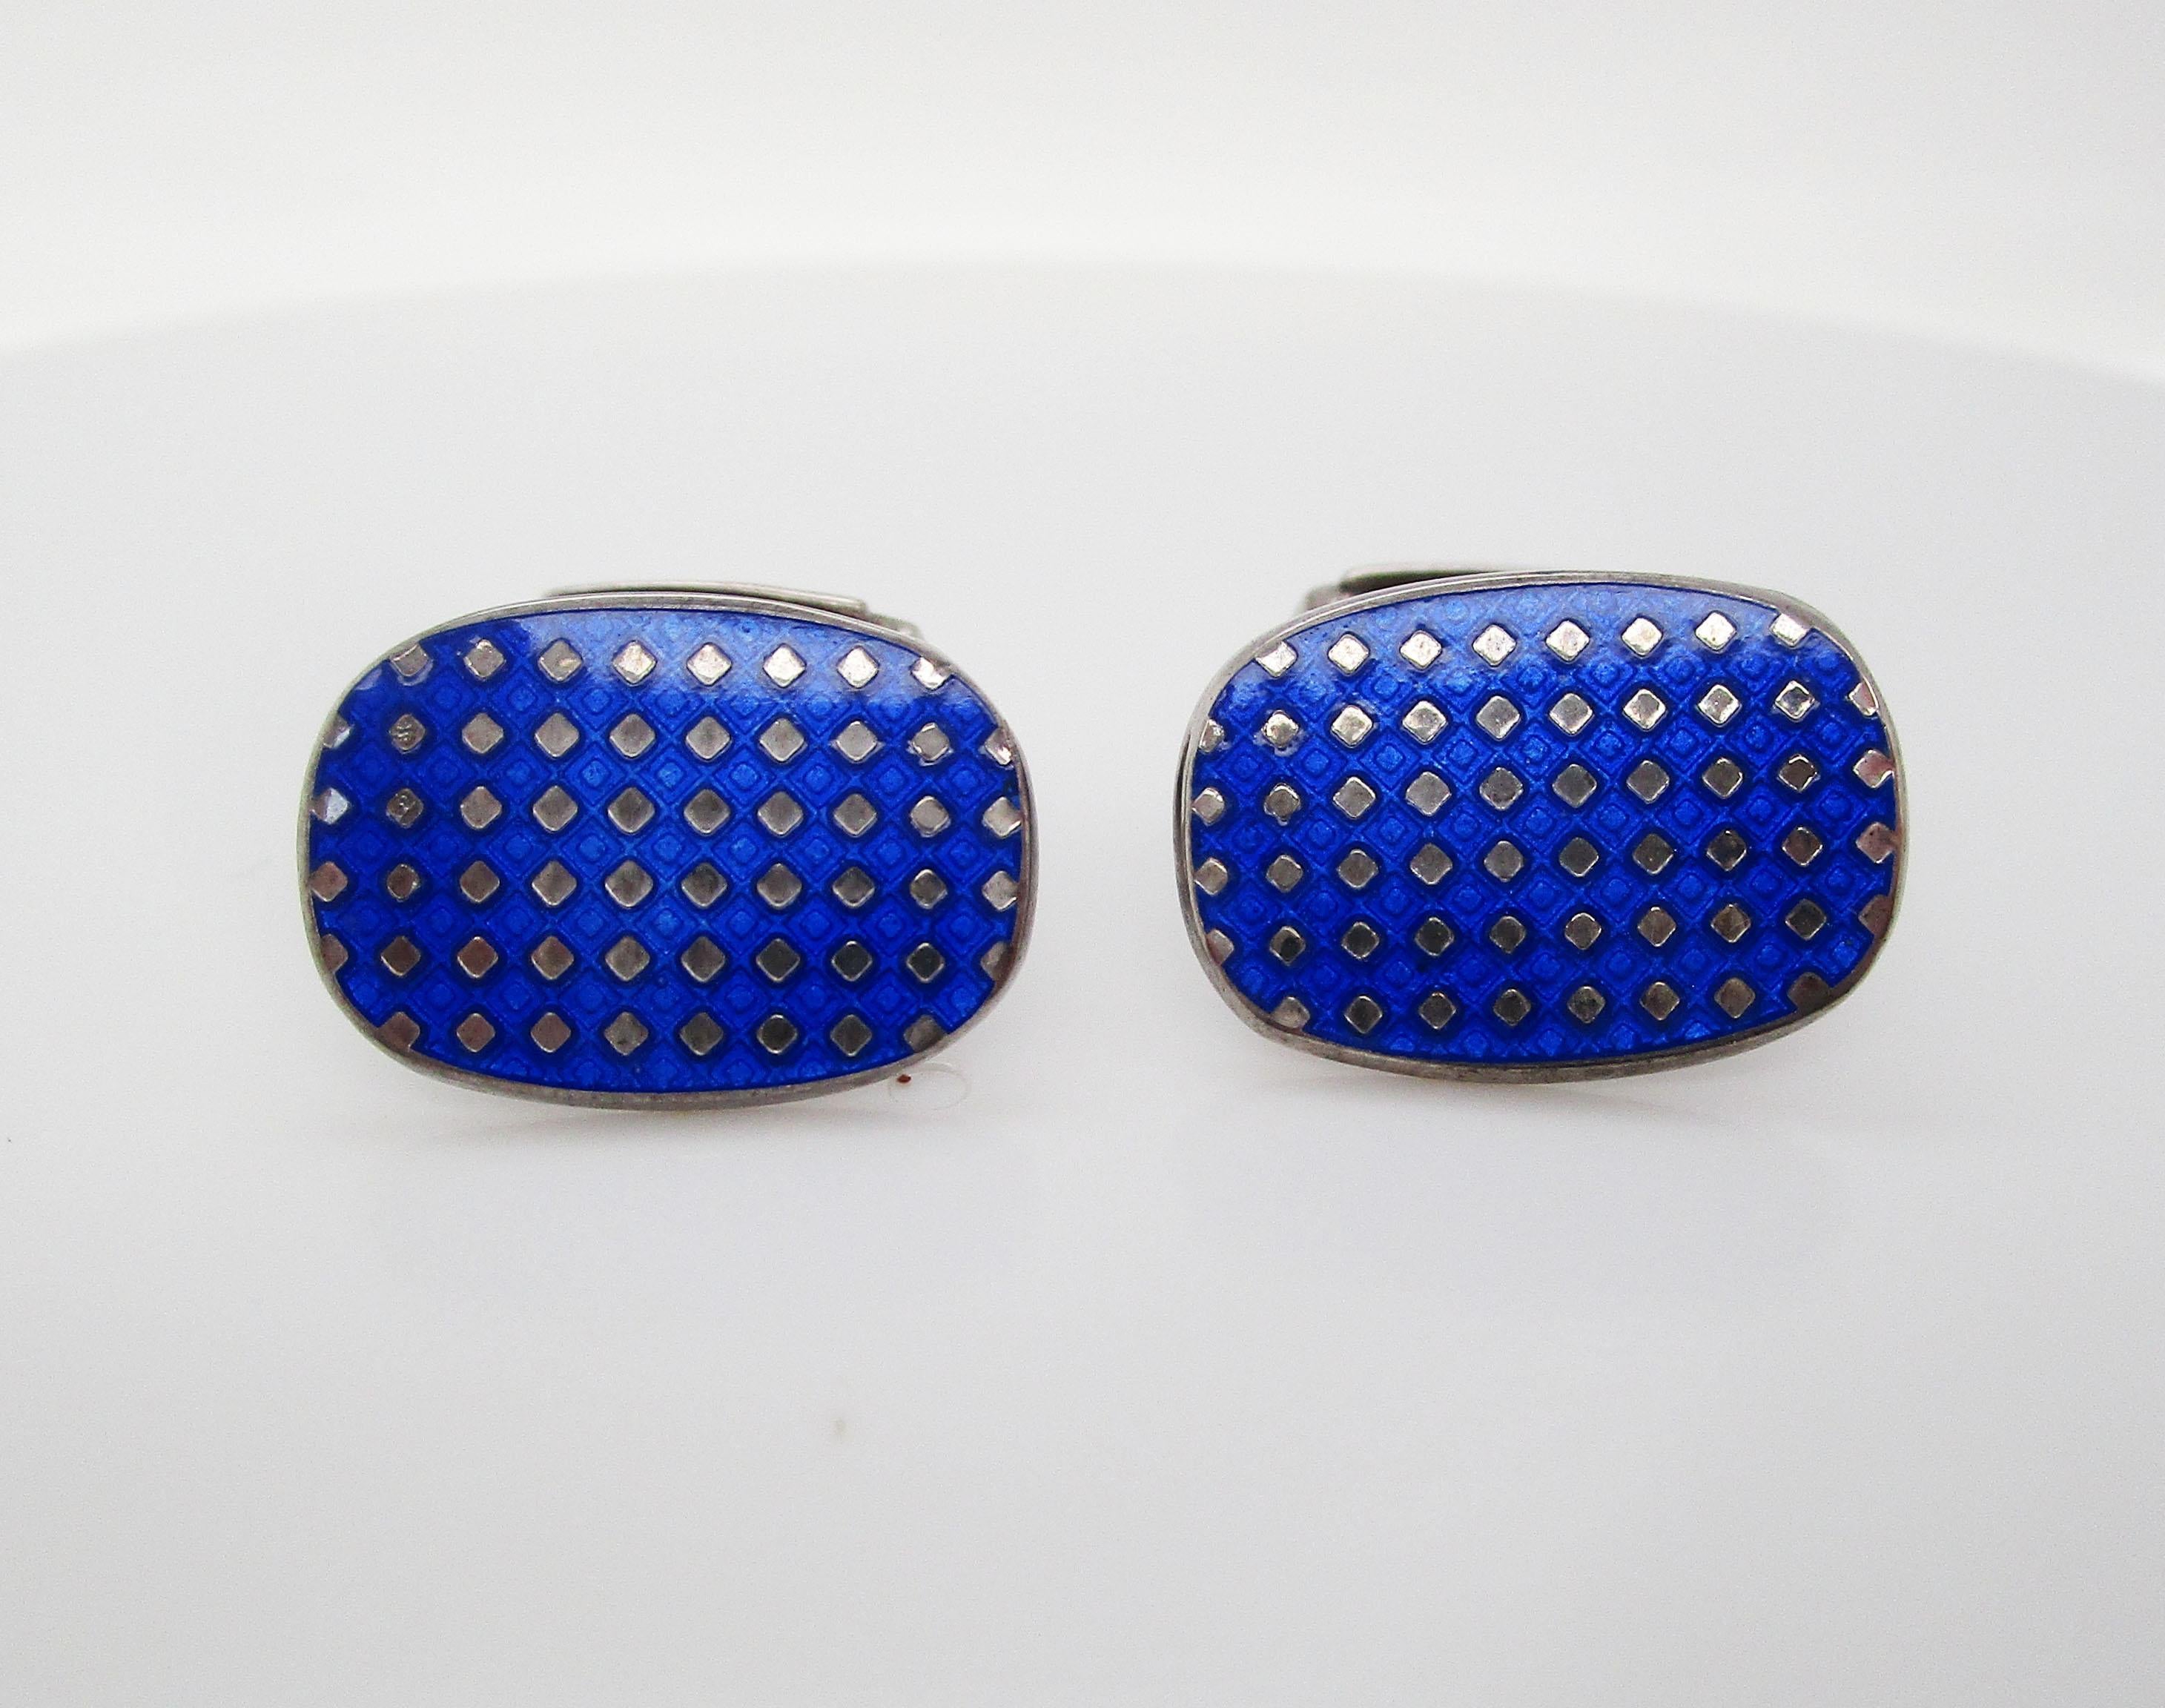 This is an incredible set of cufflinks made in England in sterling silver with gorgeous royal blue enamel panels and a negative space dot design. These links are in fantastic condition! These are the ideal staple links for the gentleman looking to